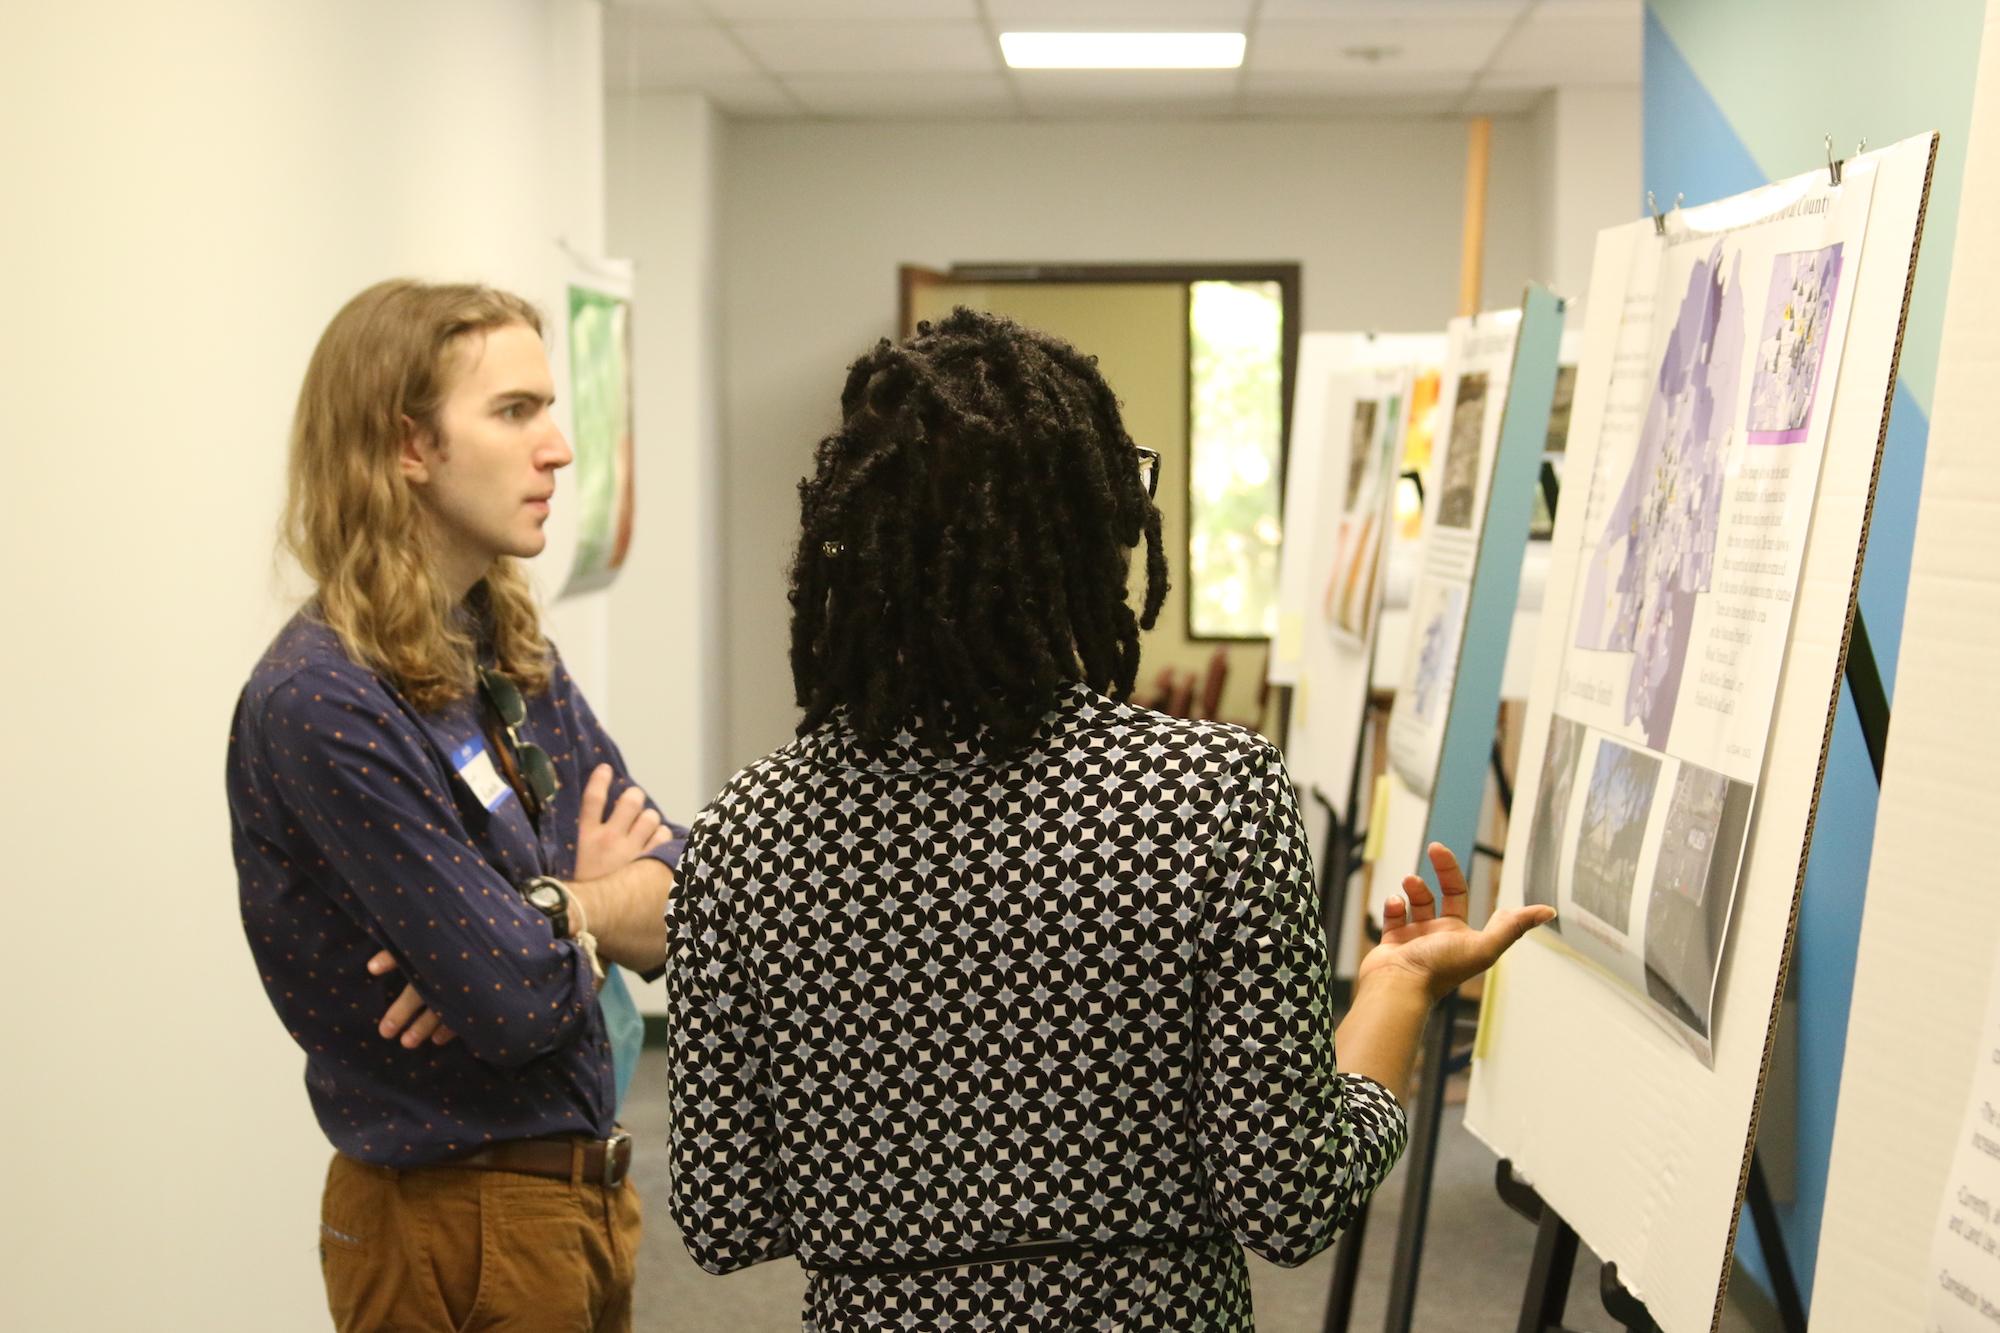 Caucasian male and African American female student discussing a map